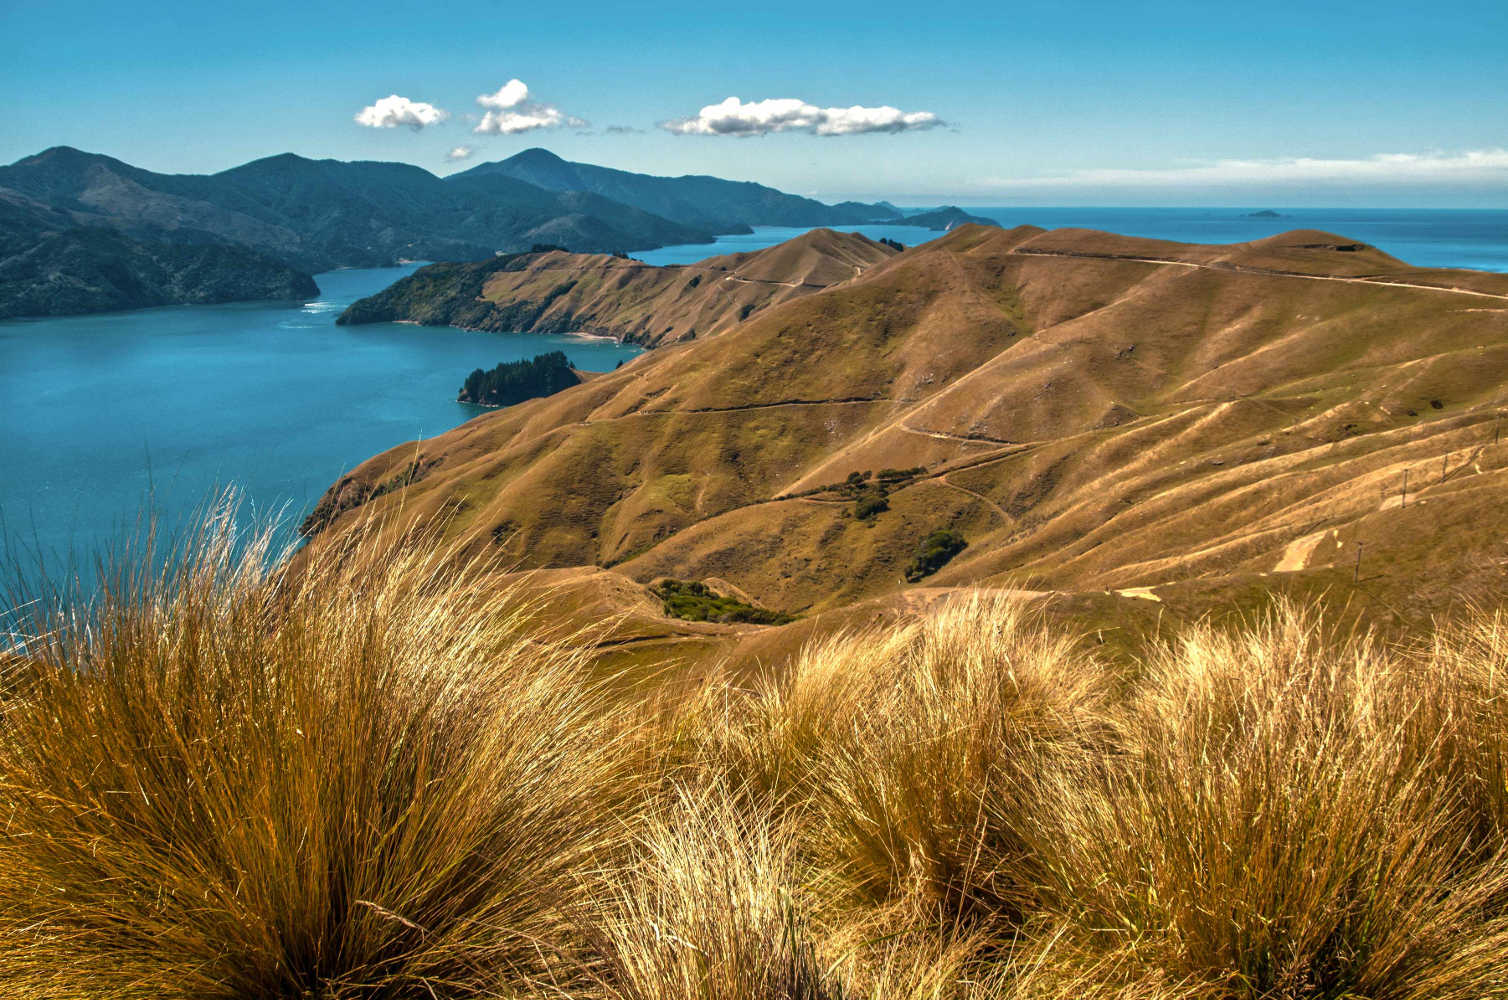 View over French Pass, Marlborough Sounds